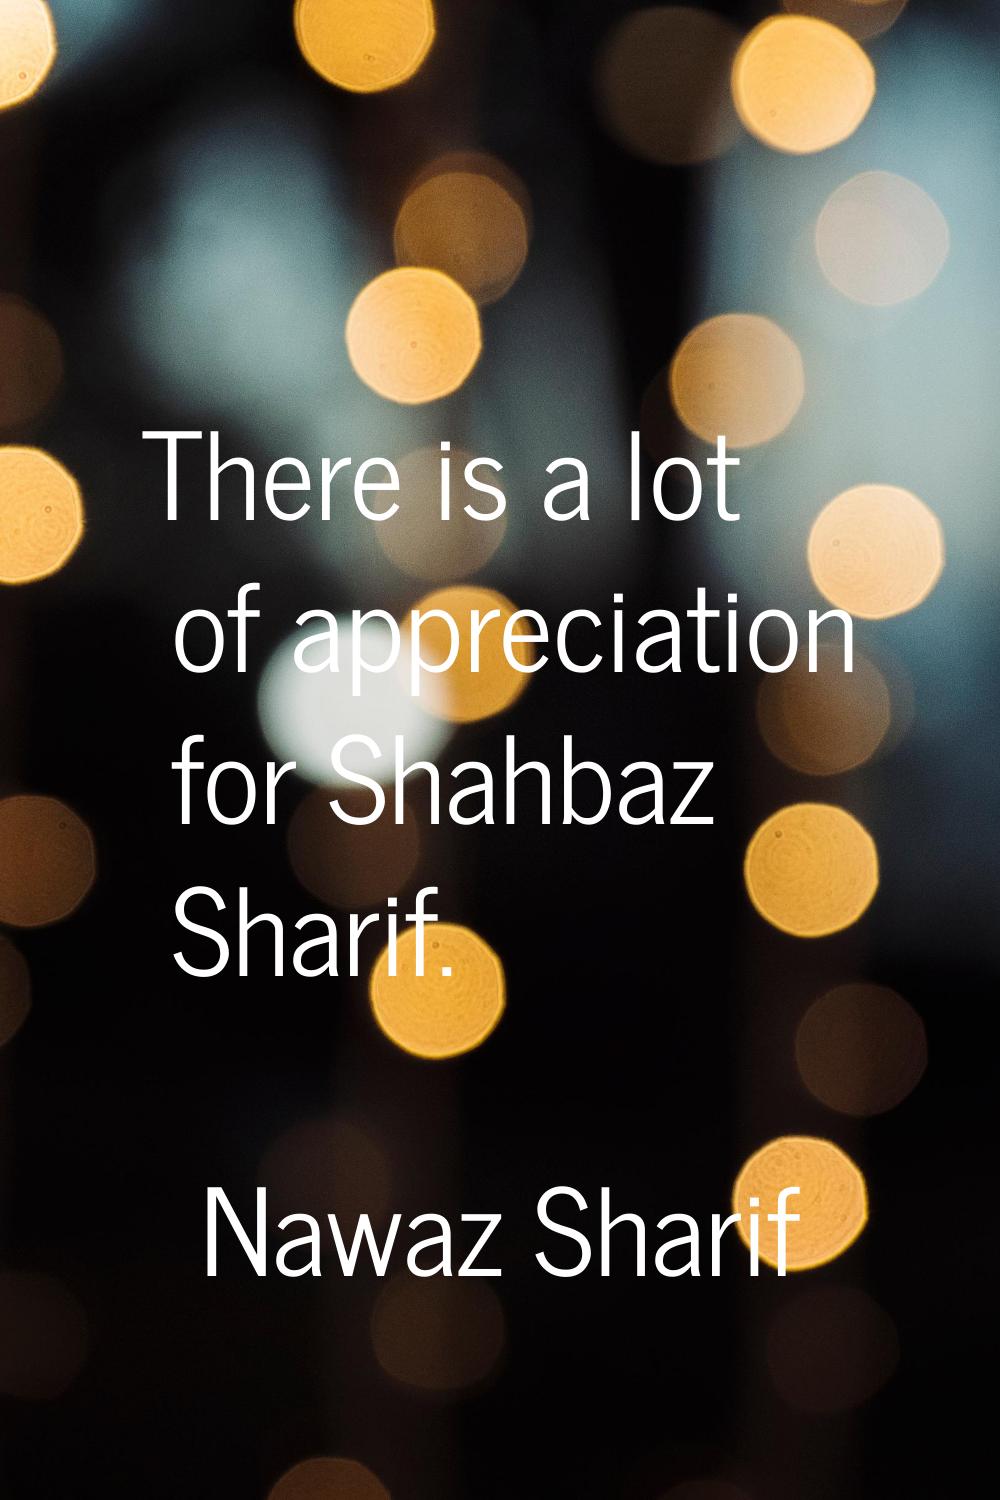 There is a lot of appreciation for Shahbaz Sharif.